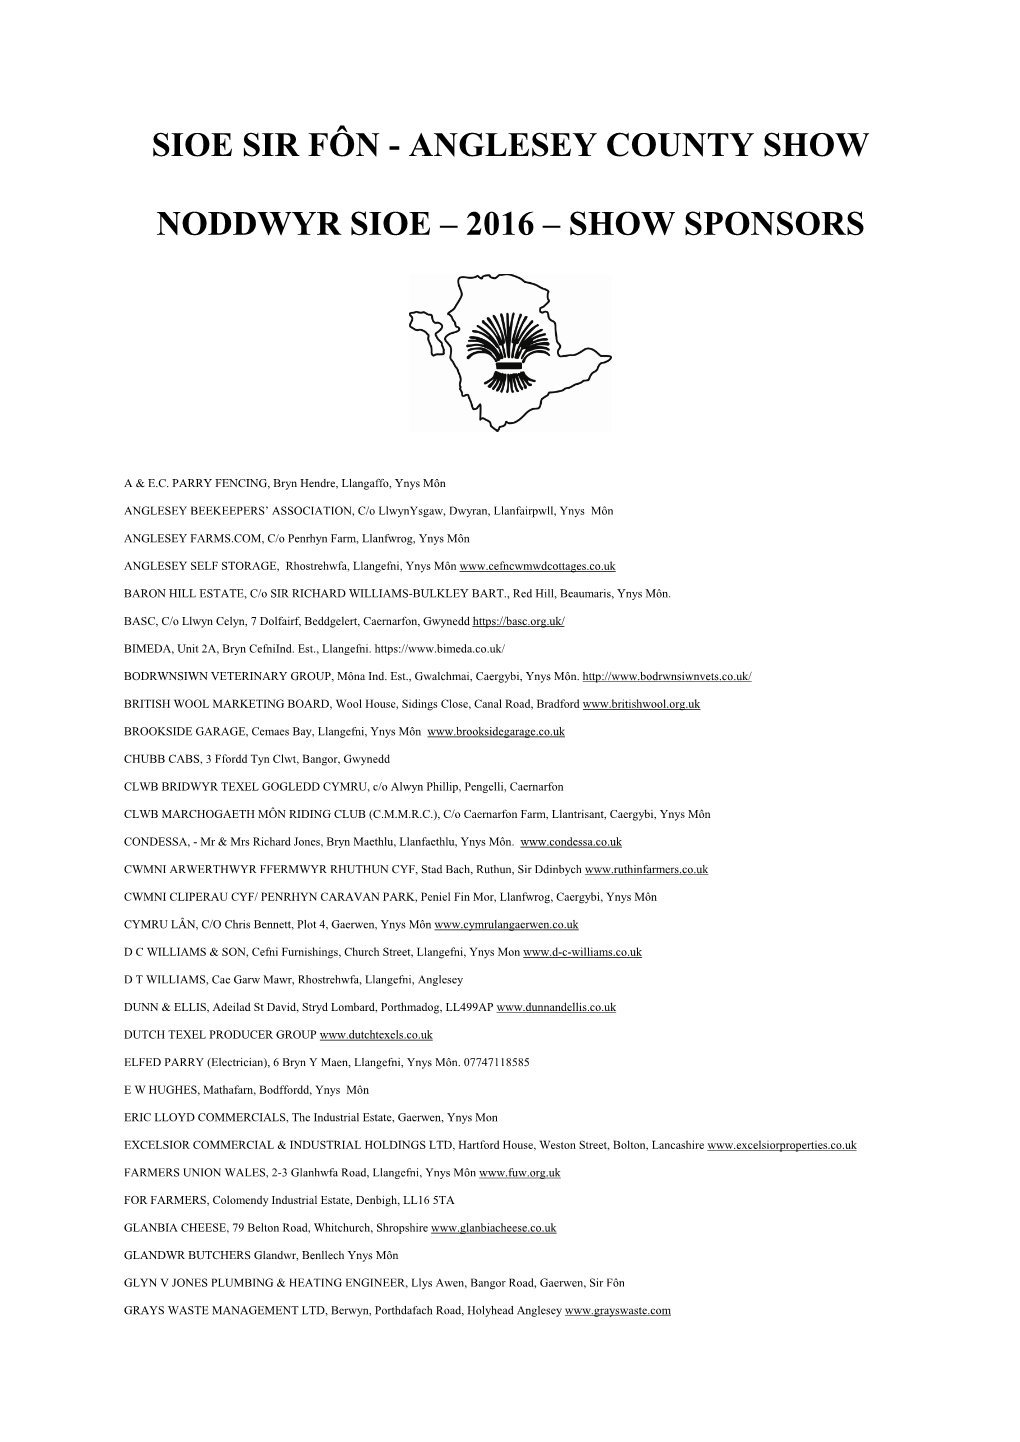 Anglesey County Show Noddwyr Sioe – 2016 – Show Sponsors